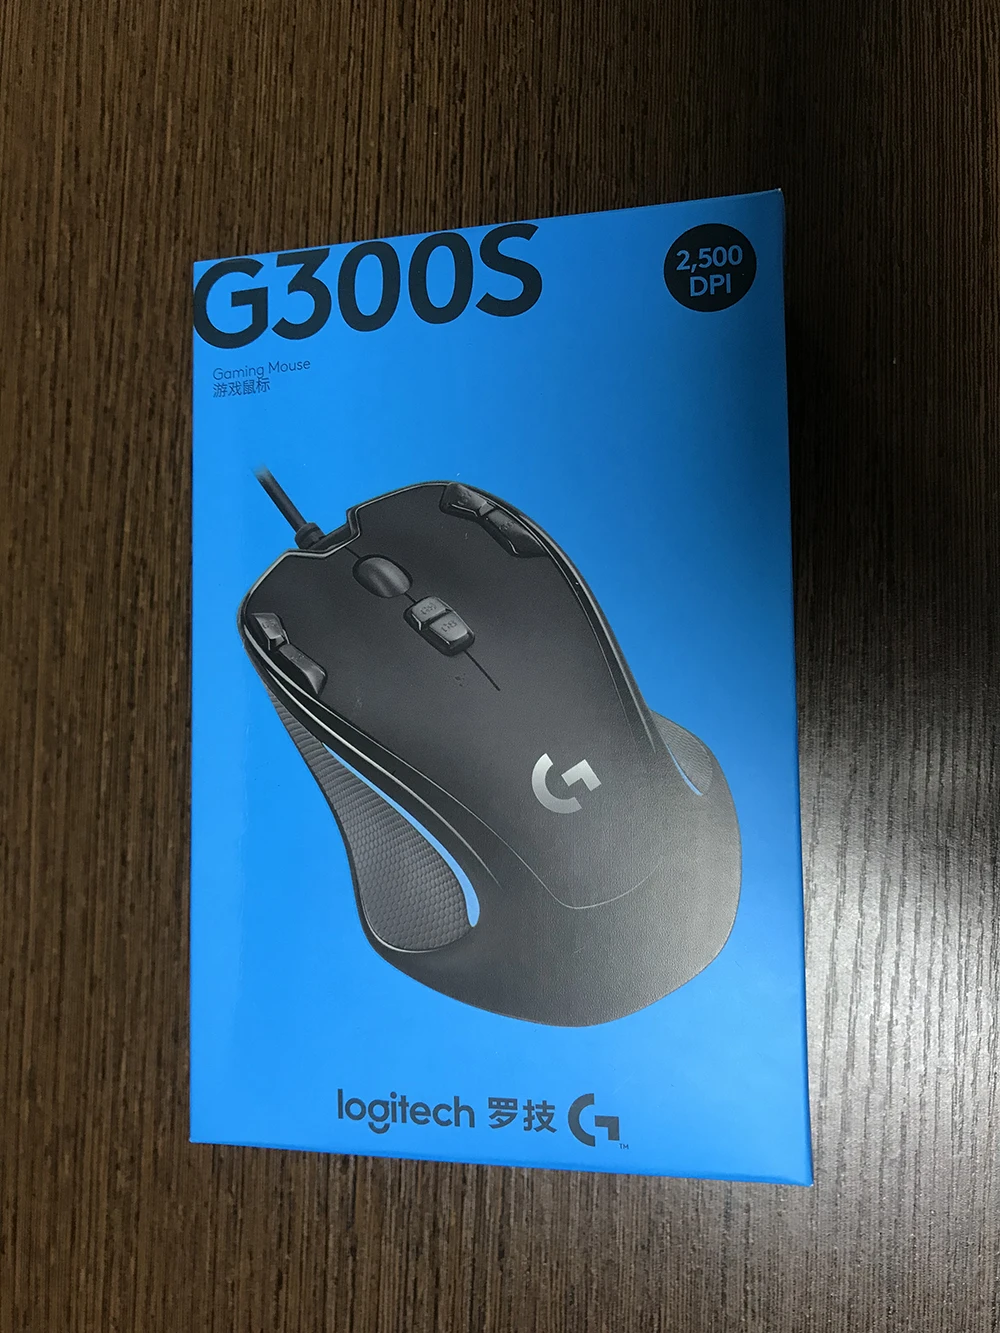 Logitech G300s G402 G502 Ambidextrous Optical Gaming Mouse USB Wired 9 Programmable Mouse for Game AliExpress